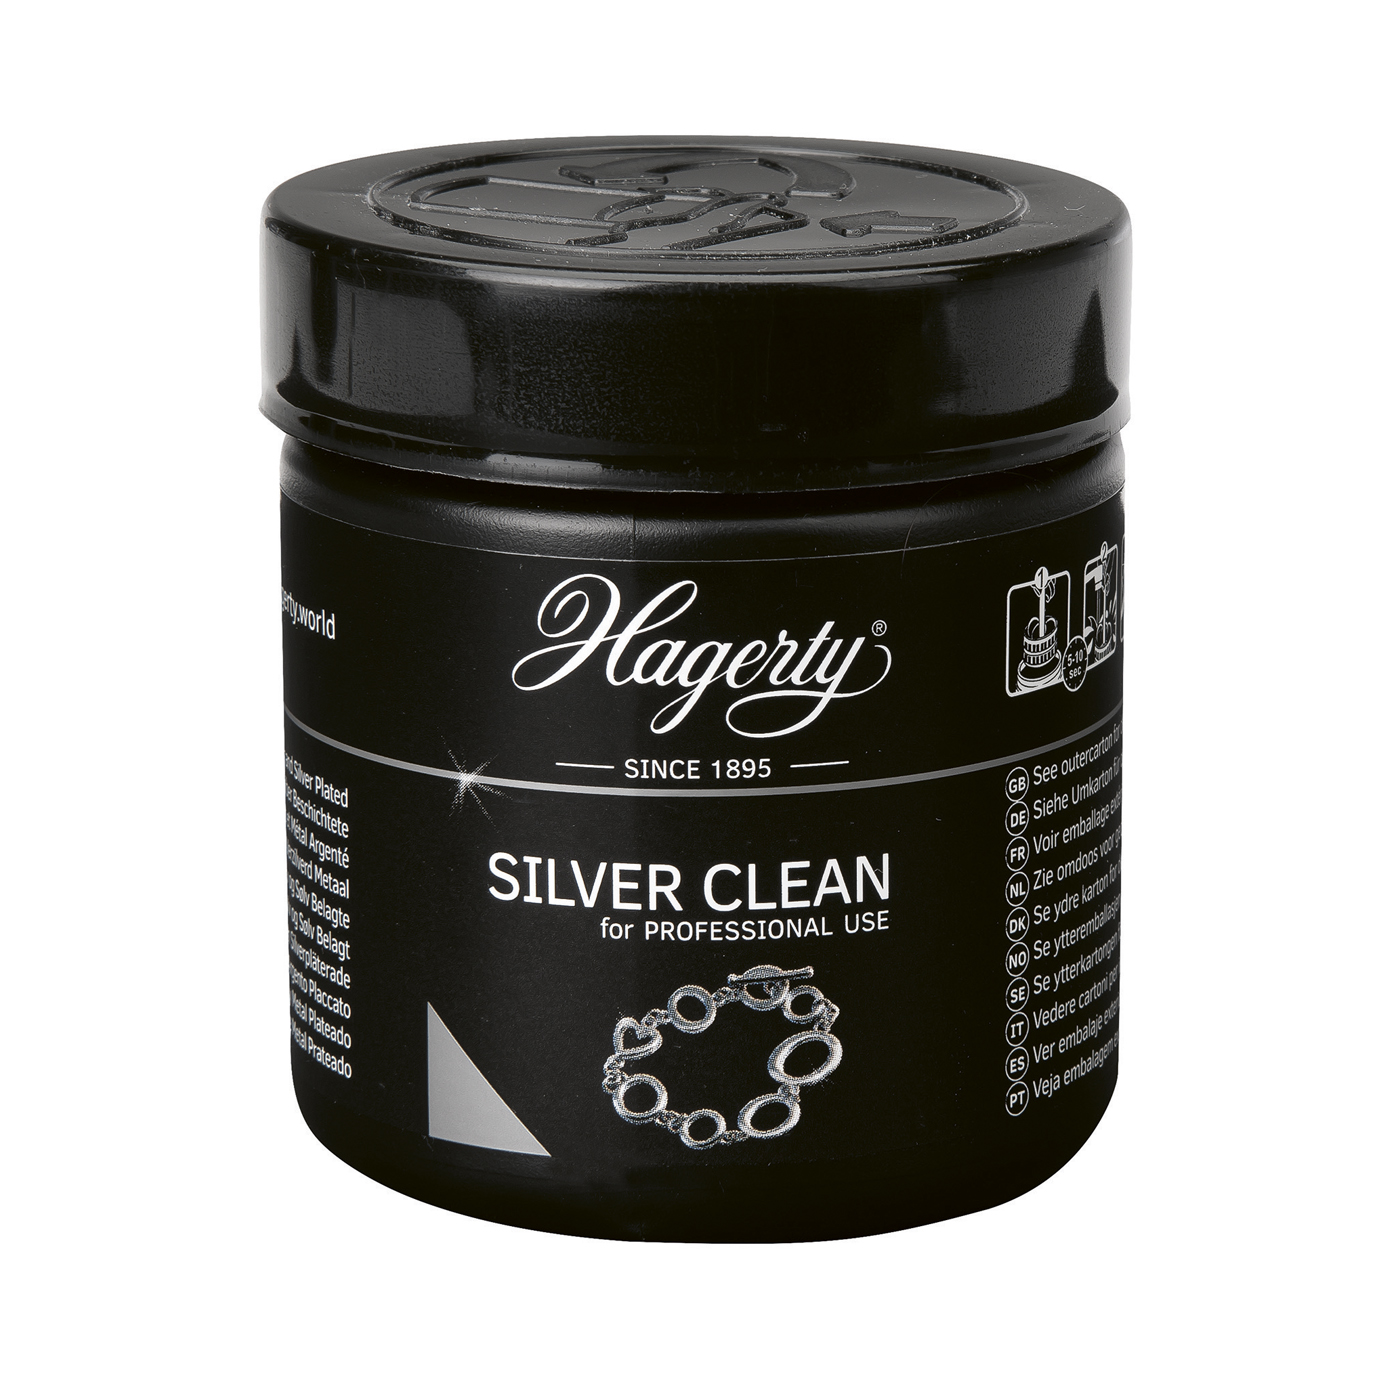 Hagerty Silver Clean Jewellery Bath, for Professional Use - 170 ml